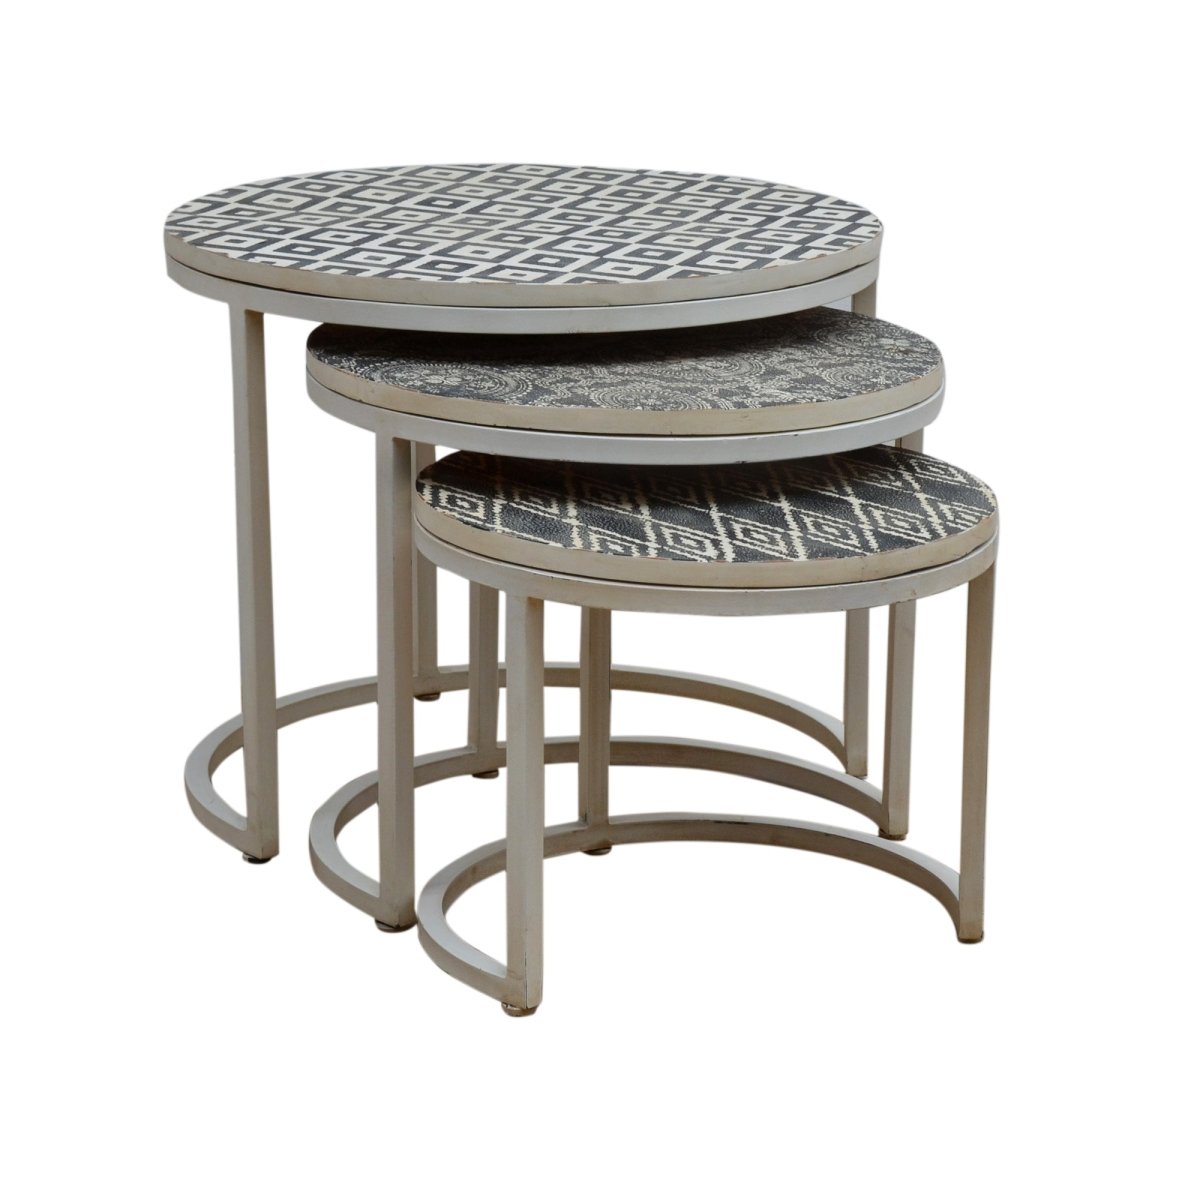 Danny set of three nesting tables - Rustic Furniture Outlet